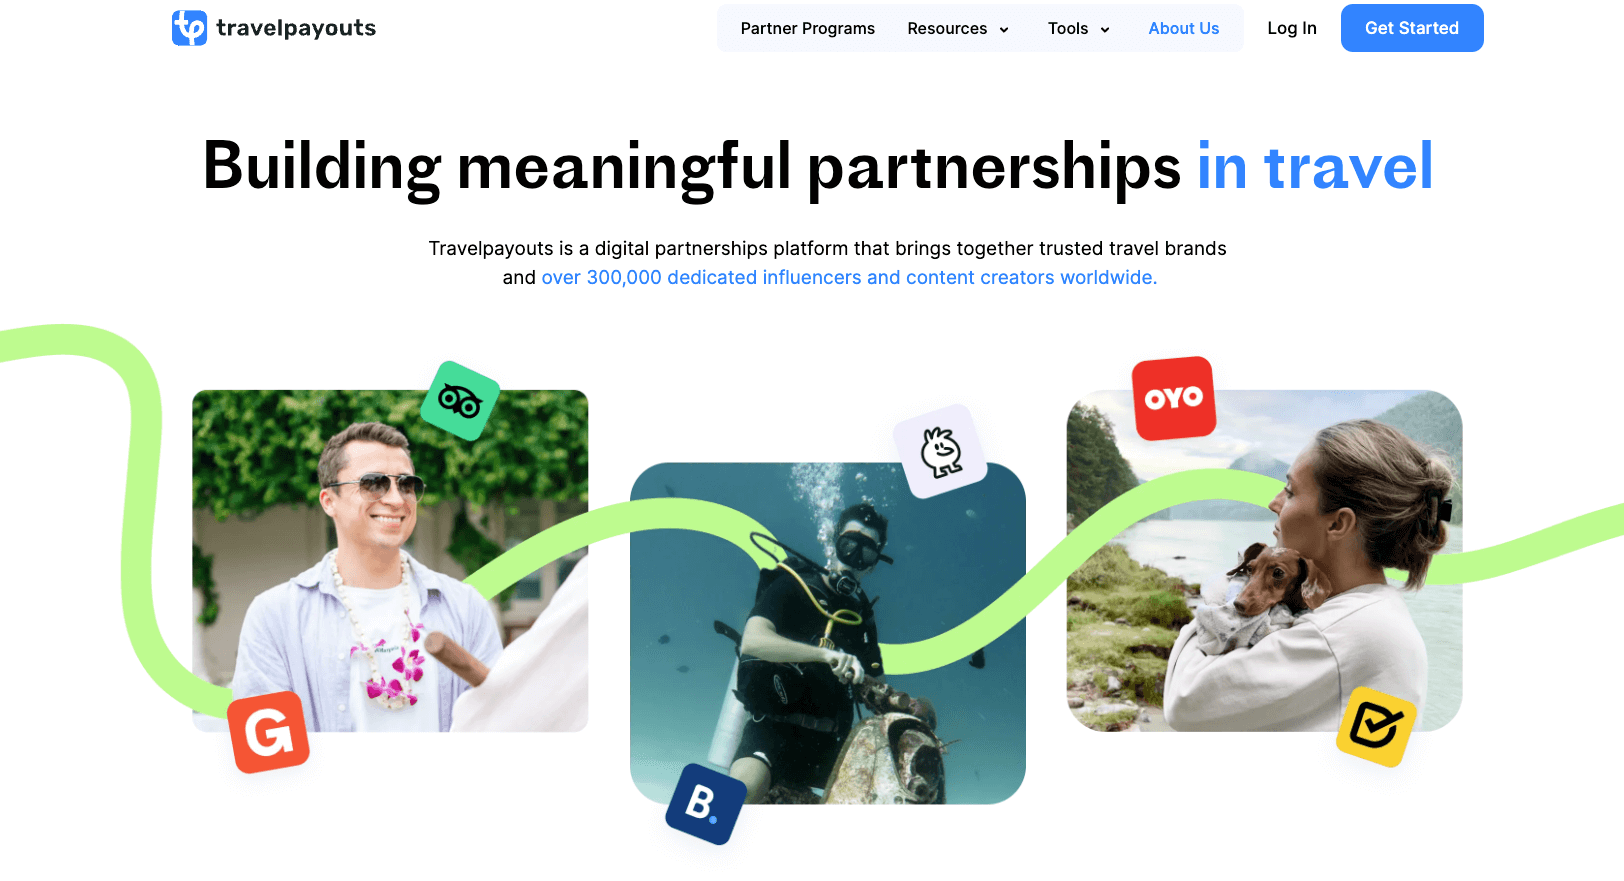 The image displays the Travelpayouts “About” page, which states that they strive for “building meaningful partnerships in travel.” The rest of the webpage shows a man smiling, a scuba diver, and a woman with a puppy surrounded by popular travel brands like GetYourGuide, OYO, DiscoverCars, Booking.com, and Tripadvisor.